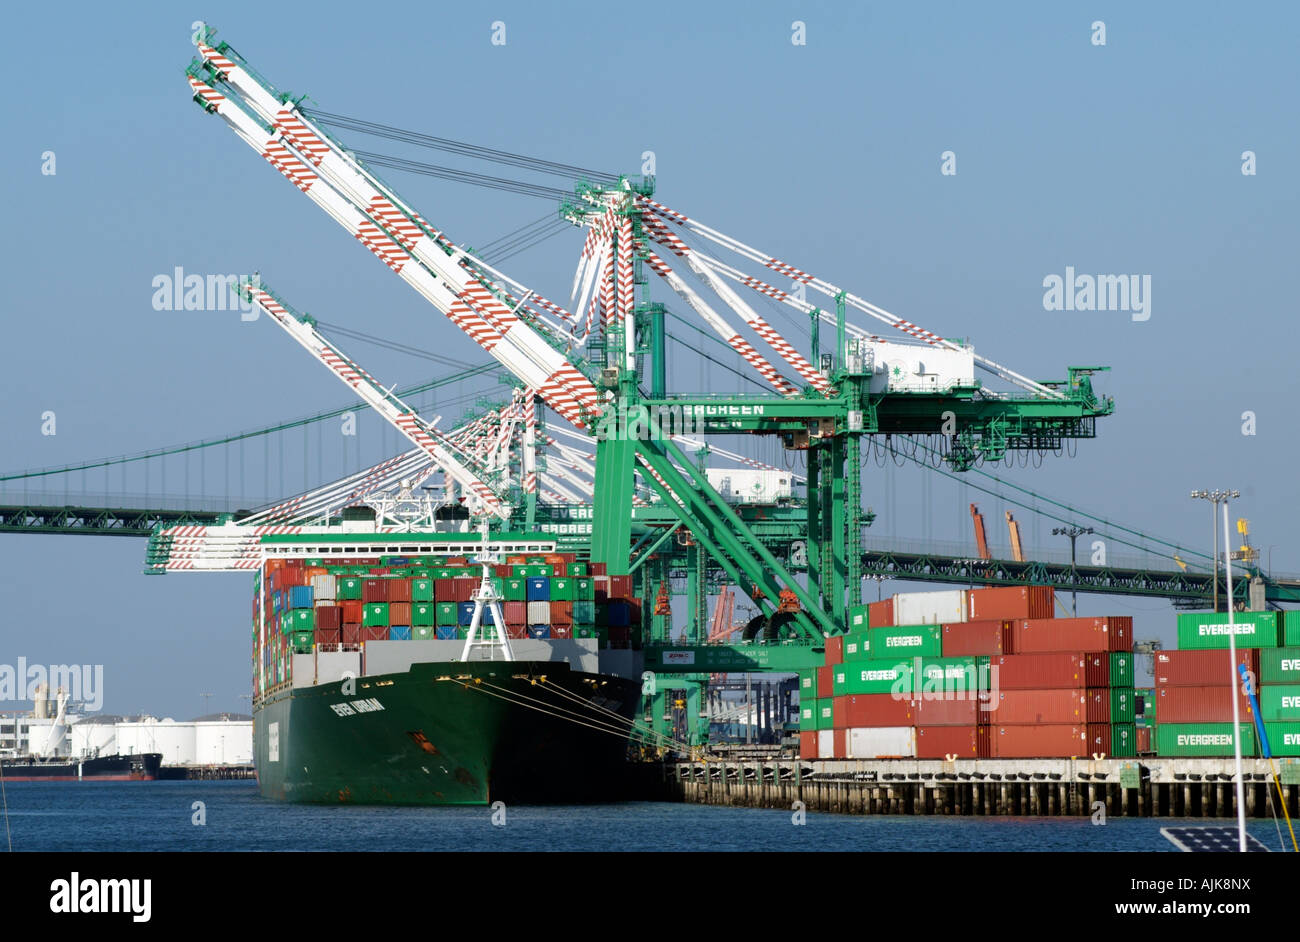 Evergreen Container Terminal Port of Los Angeles California USA Alongside loading is the Ever Urban container ship Stock Photo